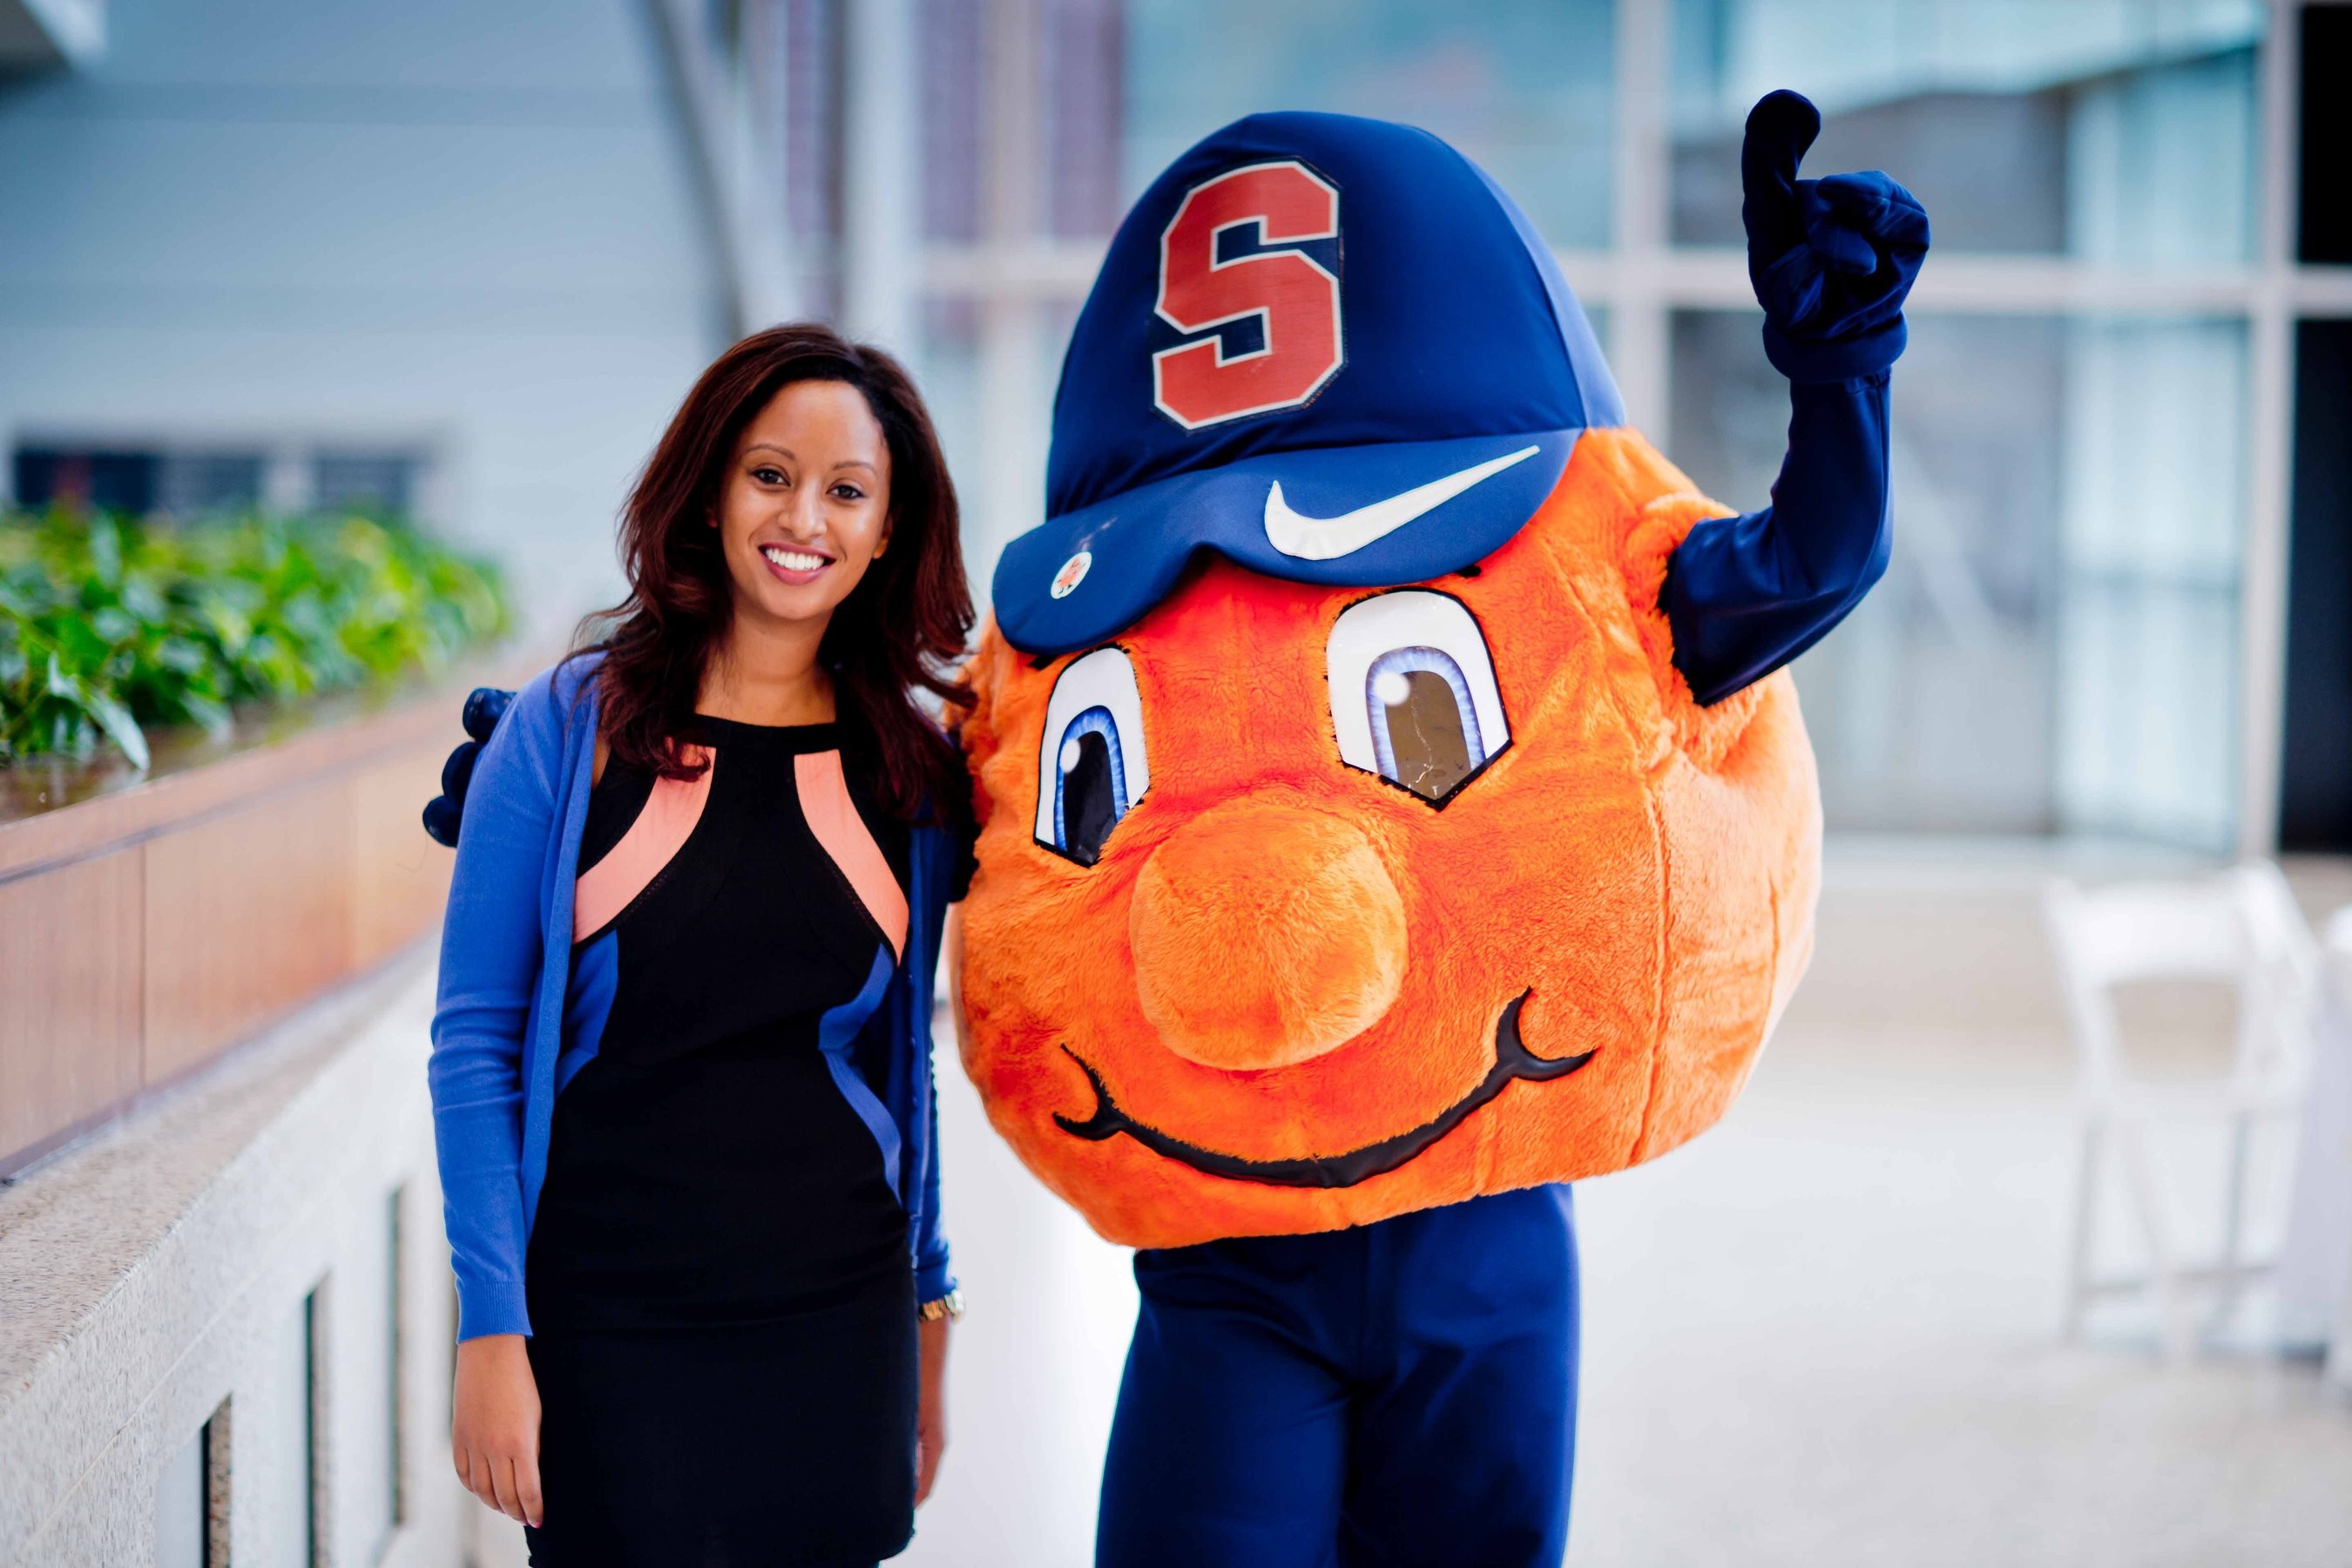 Syracuse University mascot, Otto the Orange, posing with a smiling student